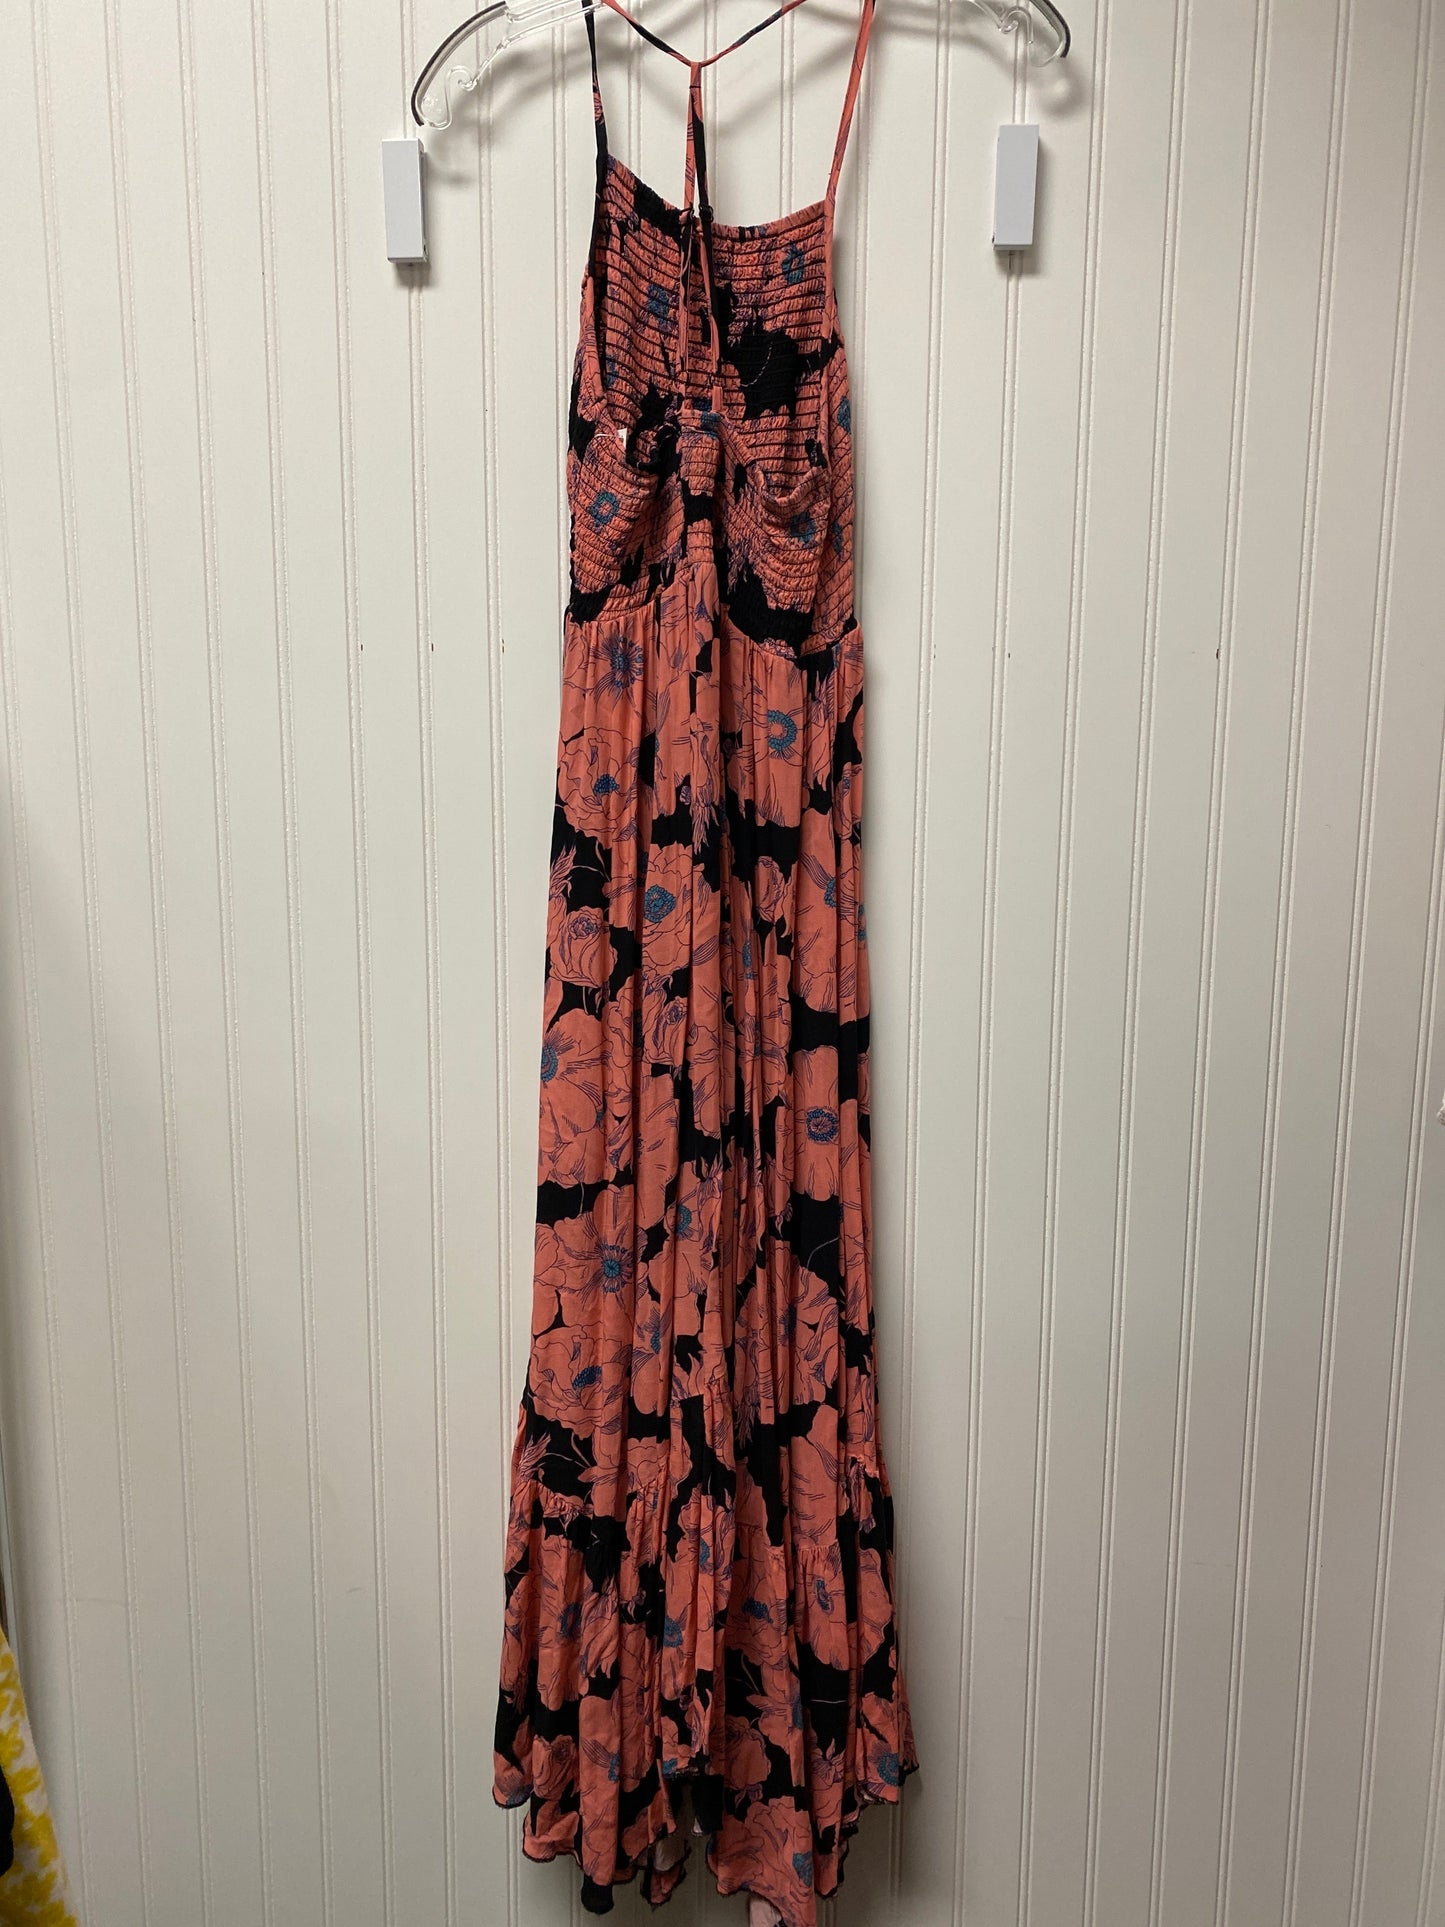 Black & Pink Dress Casual Maxi Free People, Size S